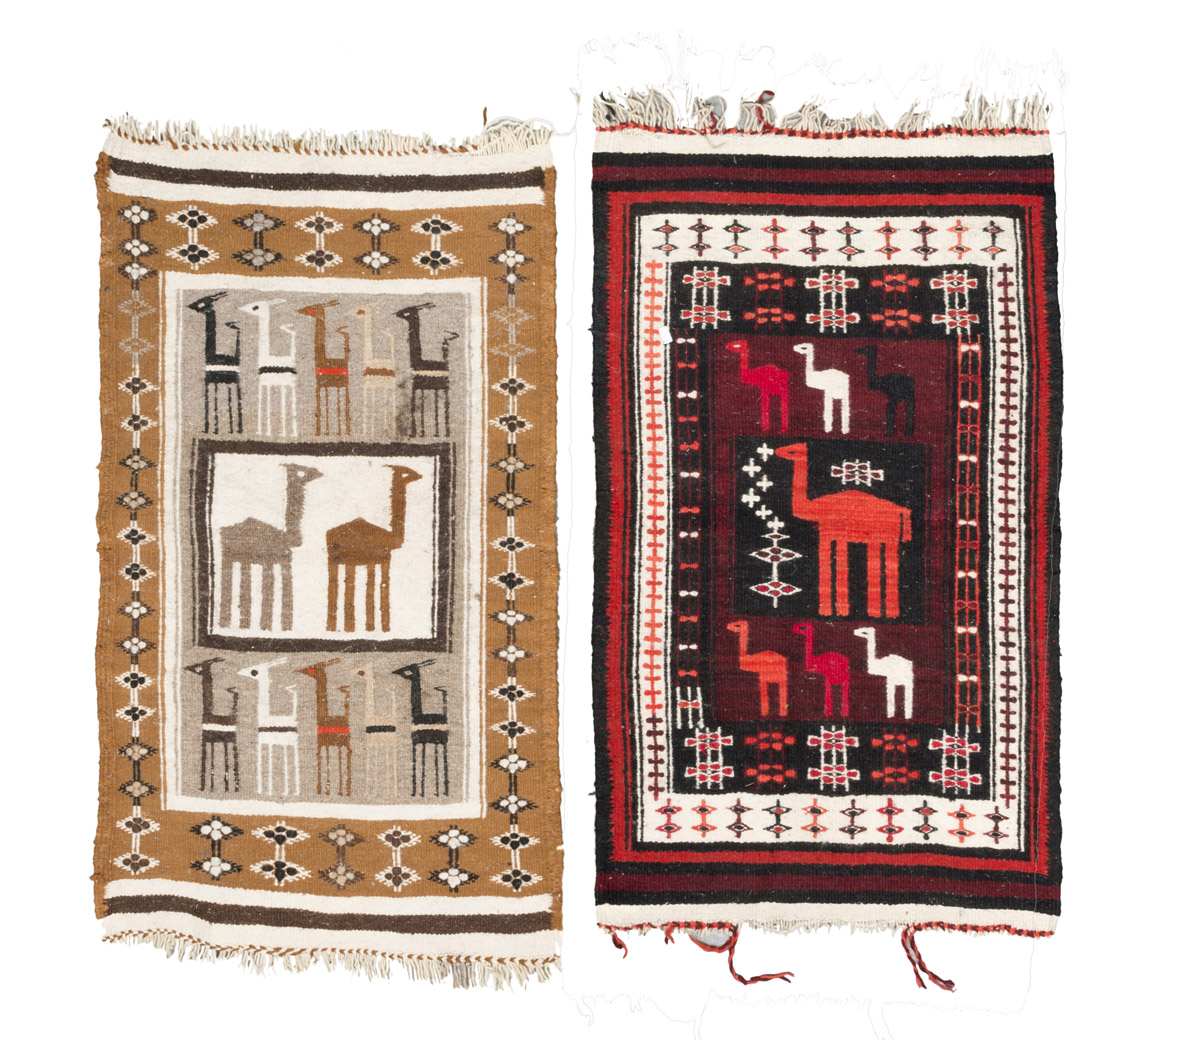 TWO NORTHAFRICAN CARPETS, 20TH CENTURY with design of camels and ornaments. Measures cm. 128 x 77